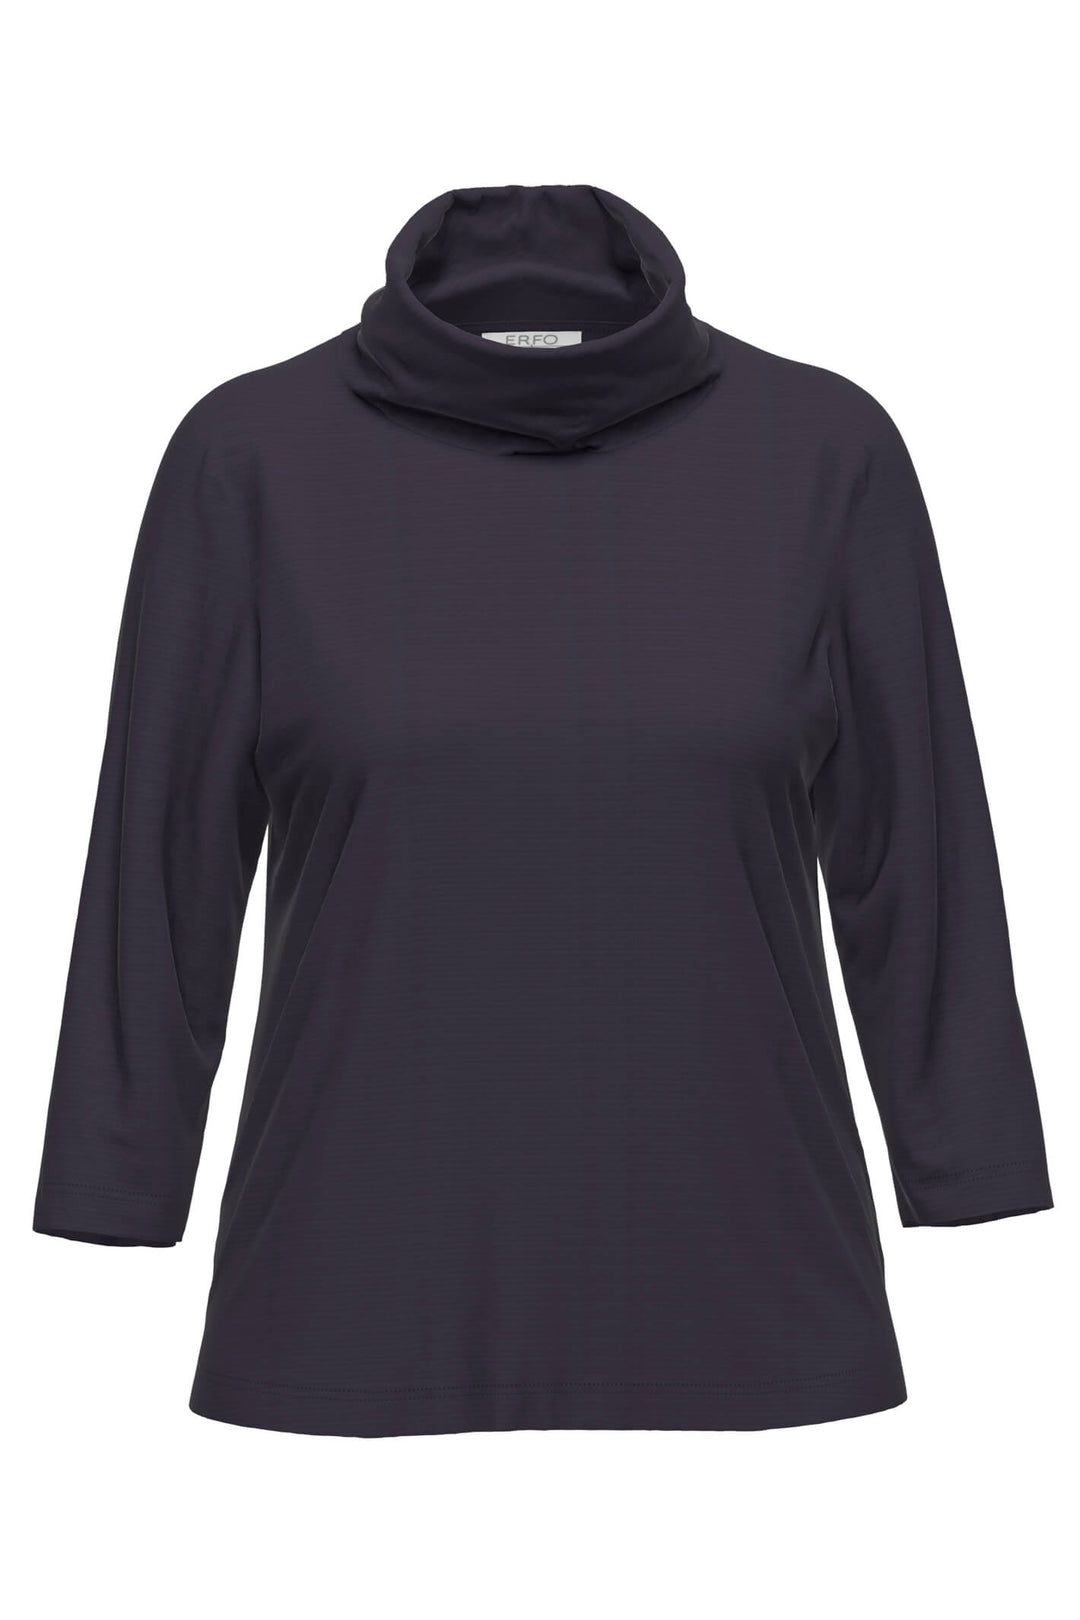 Erfo 701200500 5989 34 Sleeve Navy Blue Roll Neck Top - Shirley Allum Boutique